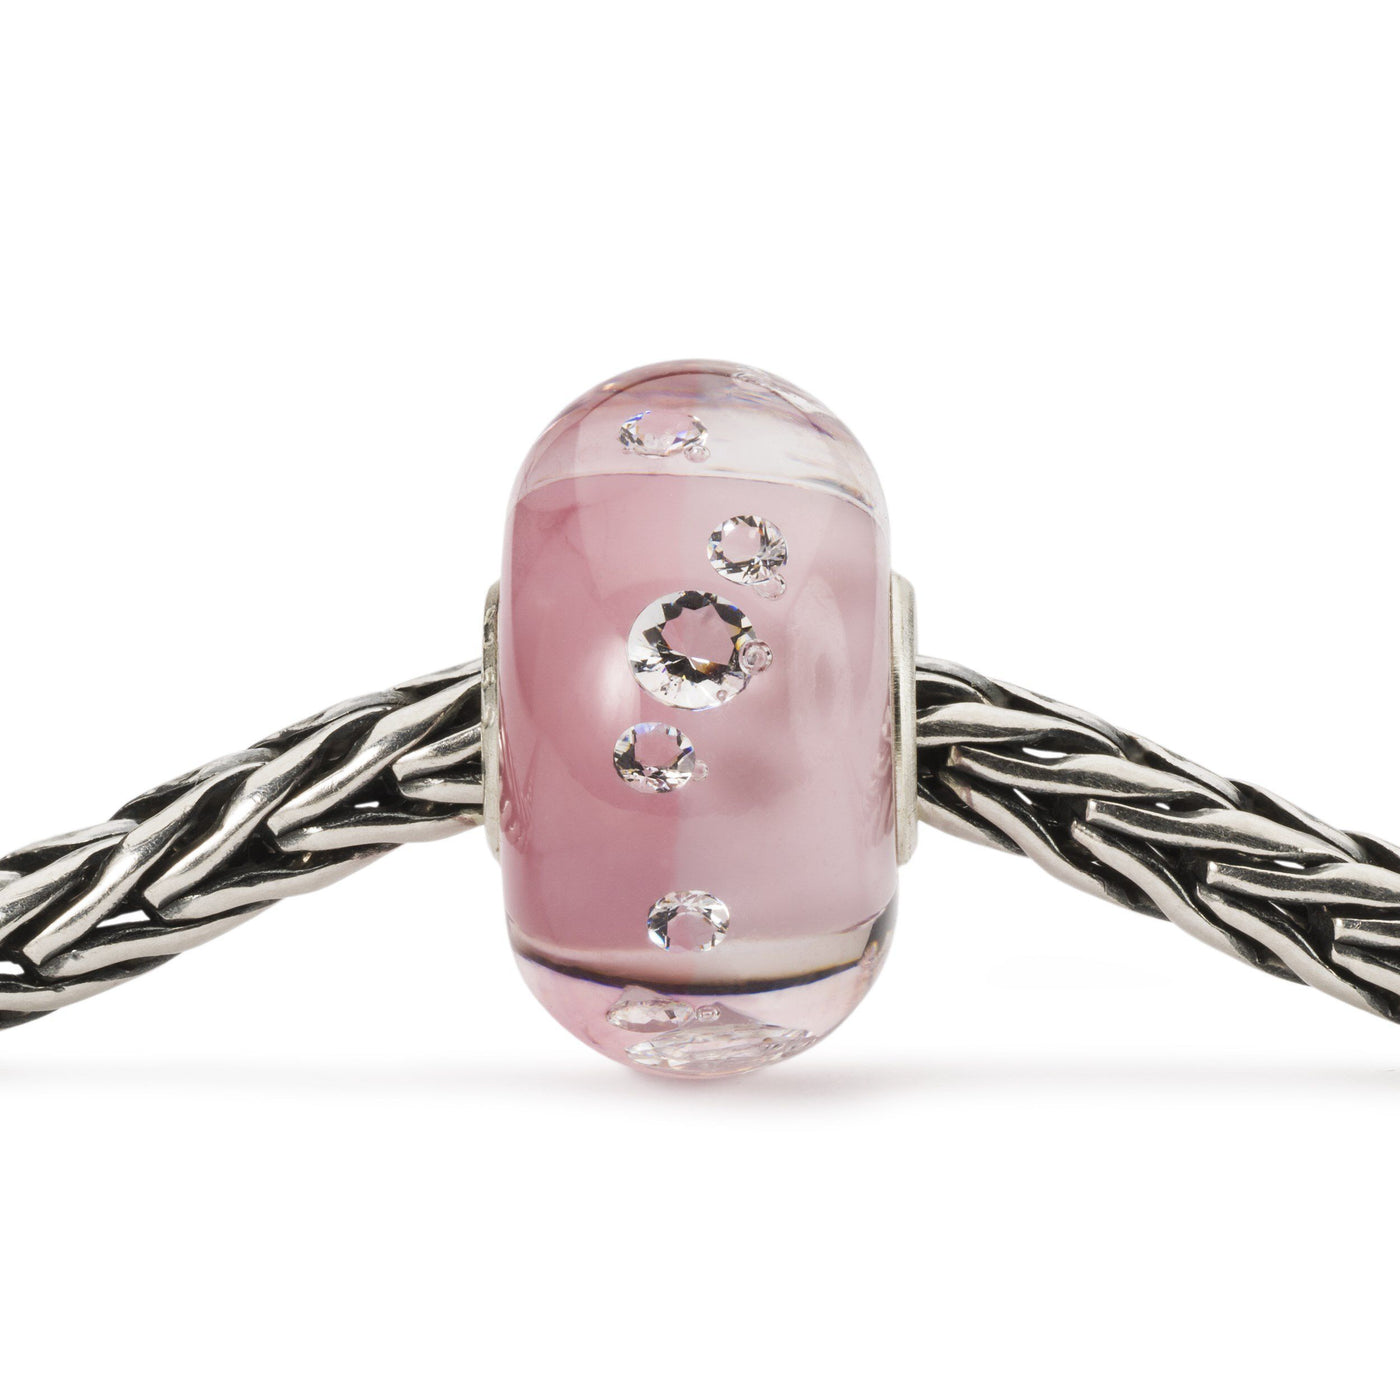 Shades of Sparkle Rose - Trollbeads Canada